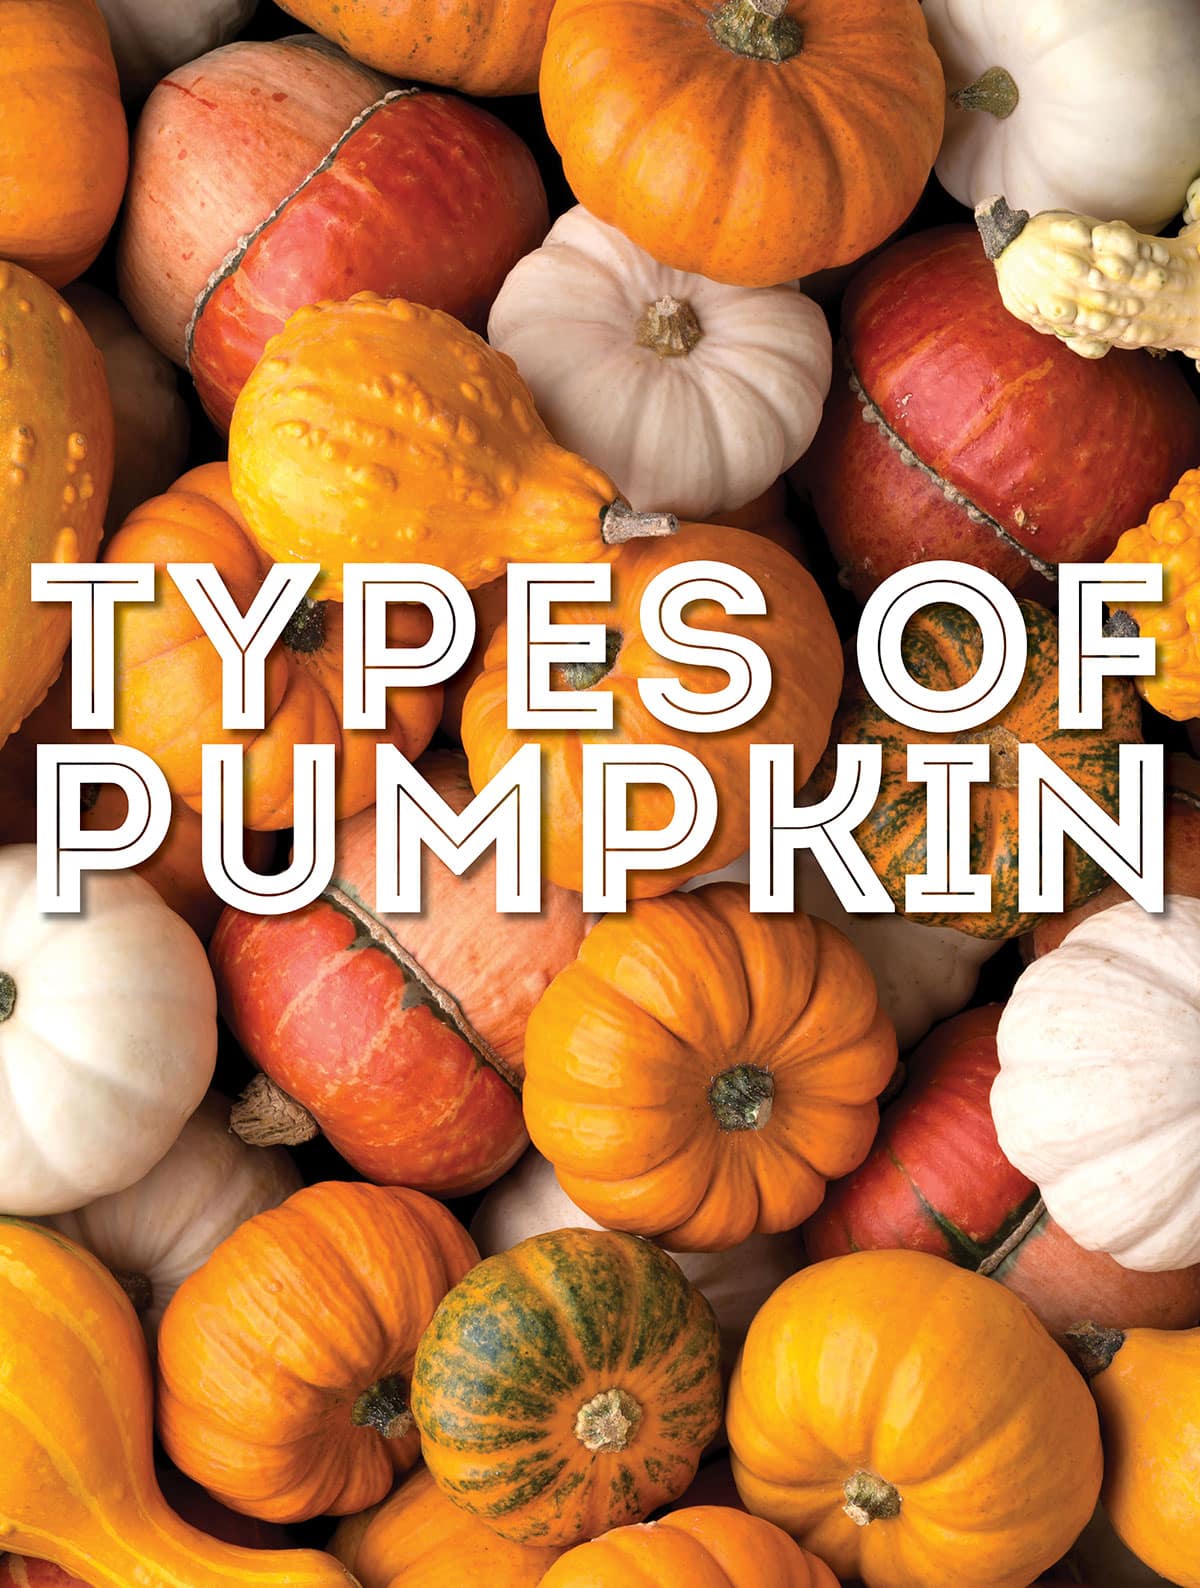 Decorative image of many yellow and green squash that says "types of pumpkin"